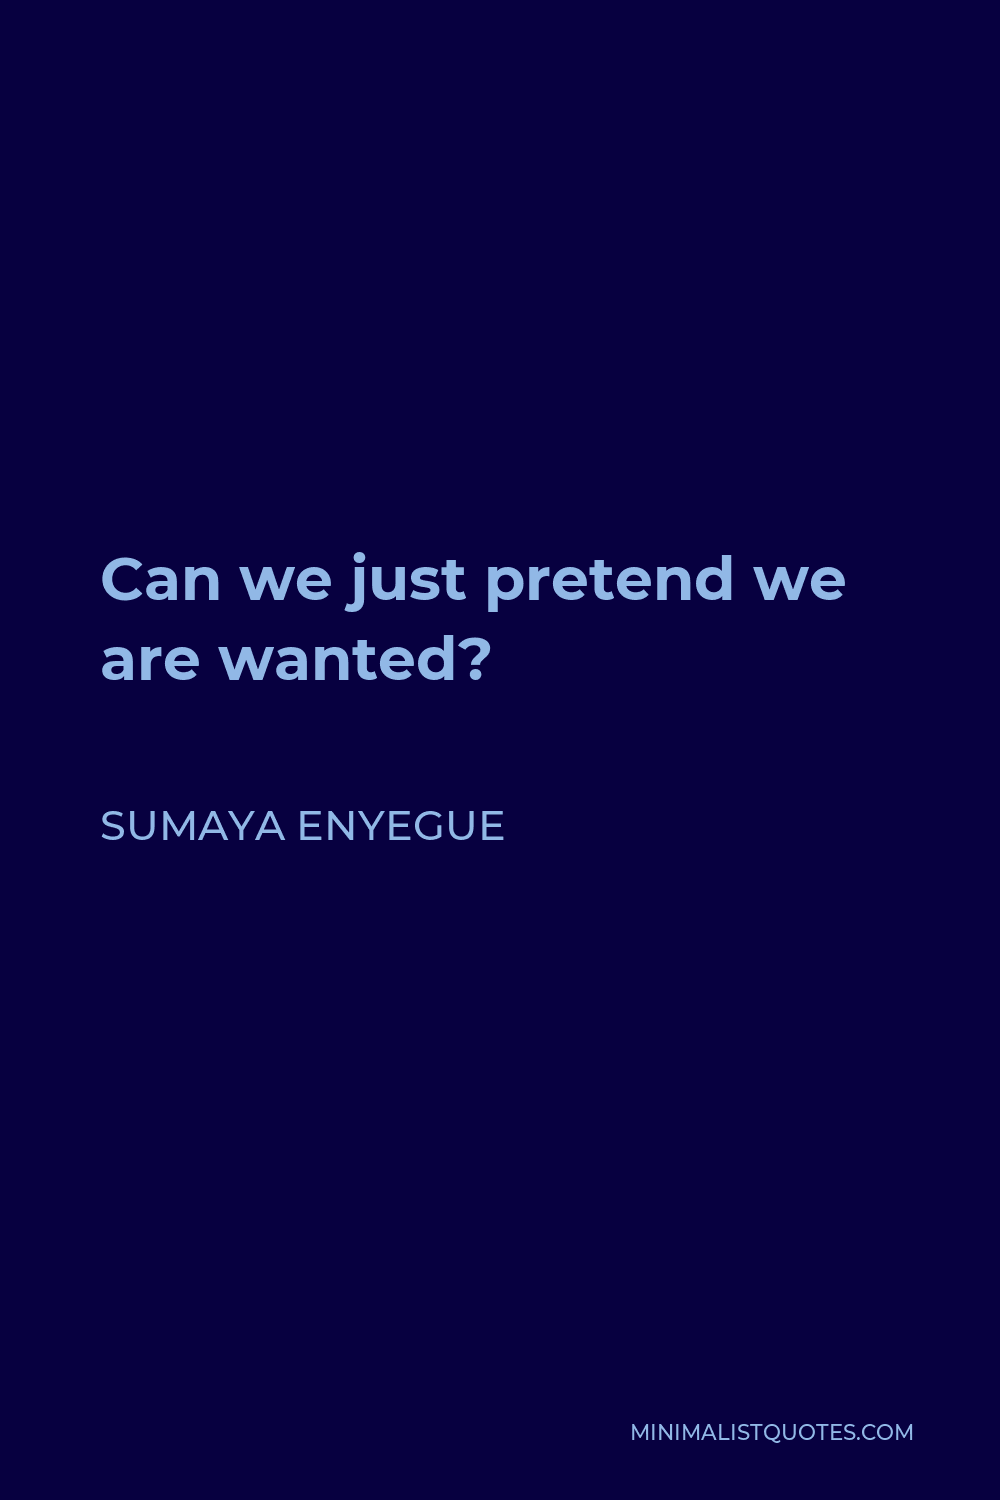 Sumaya Enyegue Quote - Can we just pretend we are wanted?